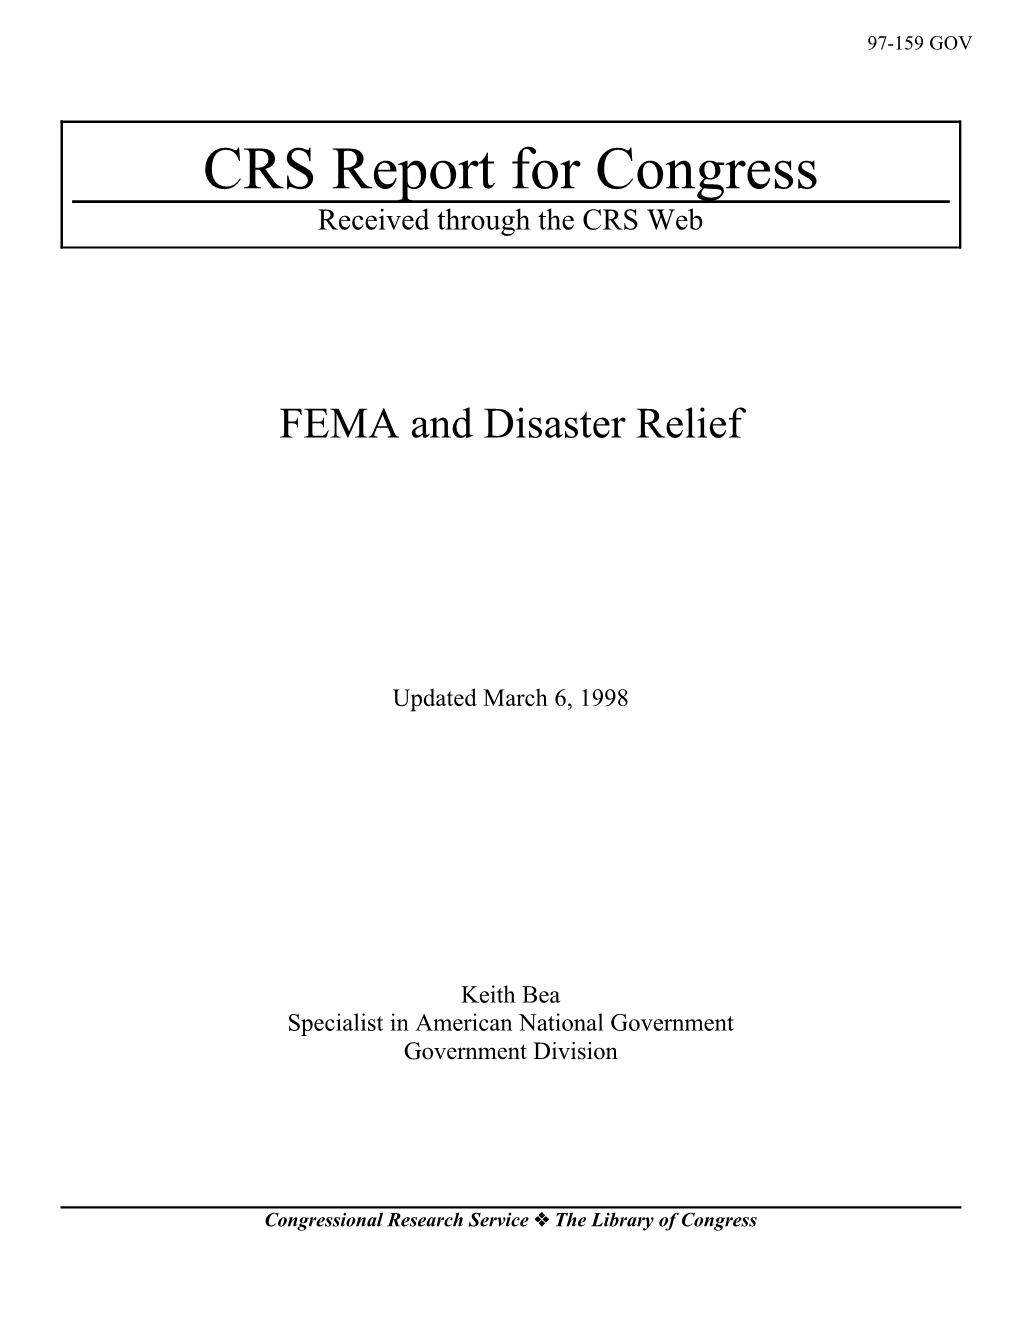 FEMA and Disaster Relief